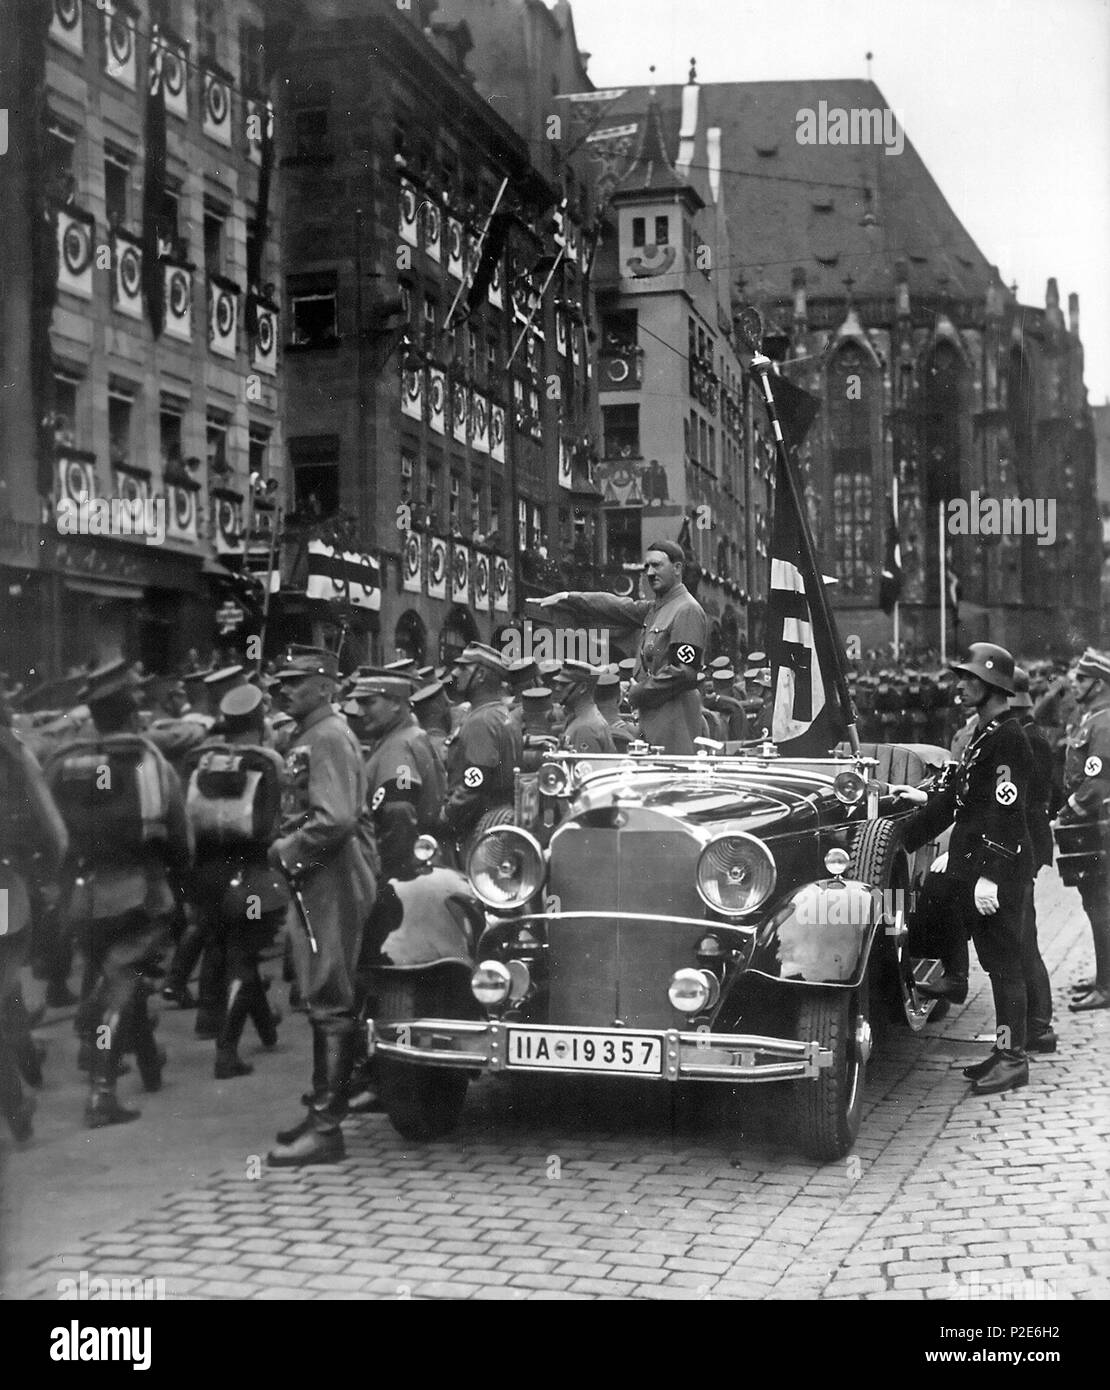 . English: Parade of SA troops past Hitler, Nuremberg 1935. In the car with Hitler: the Blutfahne, behind the car: SS-man en:Jakob Grimminger the carrier of the Blutfahne flag. From the Reichsparteitag der NSDAP 10th-16th September 1935 (see also File:Bundesarchiv Bild 183-1982-0809-502, Nürnberg, Reichsparteitag, SA-Marsch.jpg Deutsch: Nürnberg, eine Parade der SA marschieren an Hitler vorbei. Im Auto hinter Hitler: Die de:Blutfahne (NSDAP), rechts daneben der SS-Mann de:Jakob Grimminger, der Träger der Blutfahne war . September 1935. This file is lacking author information. 45 Reichsparteita Stock Photo